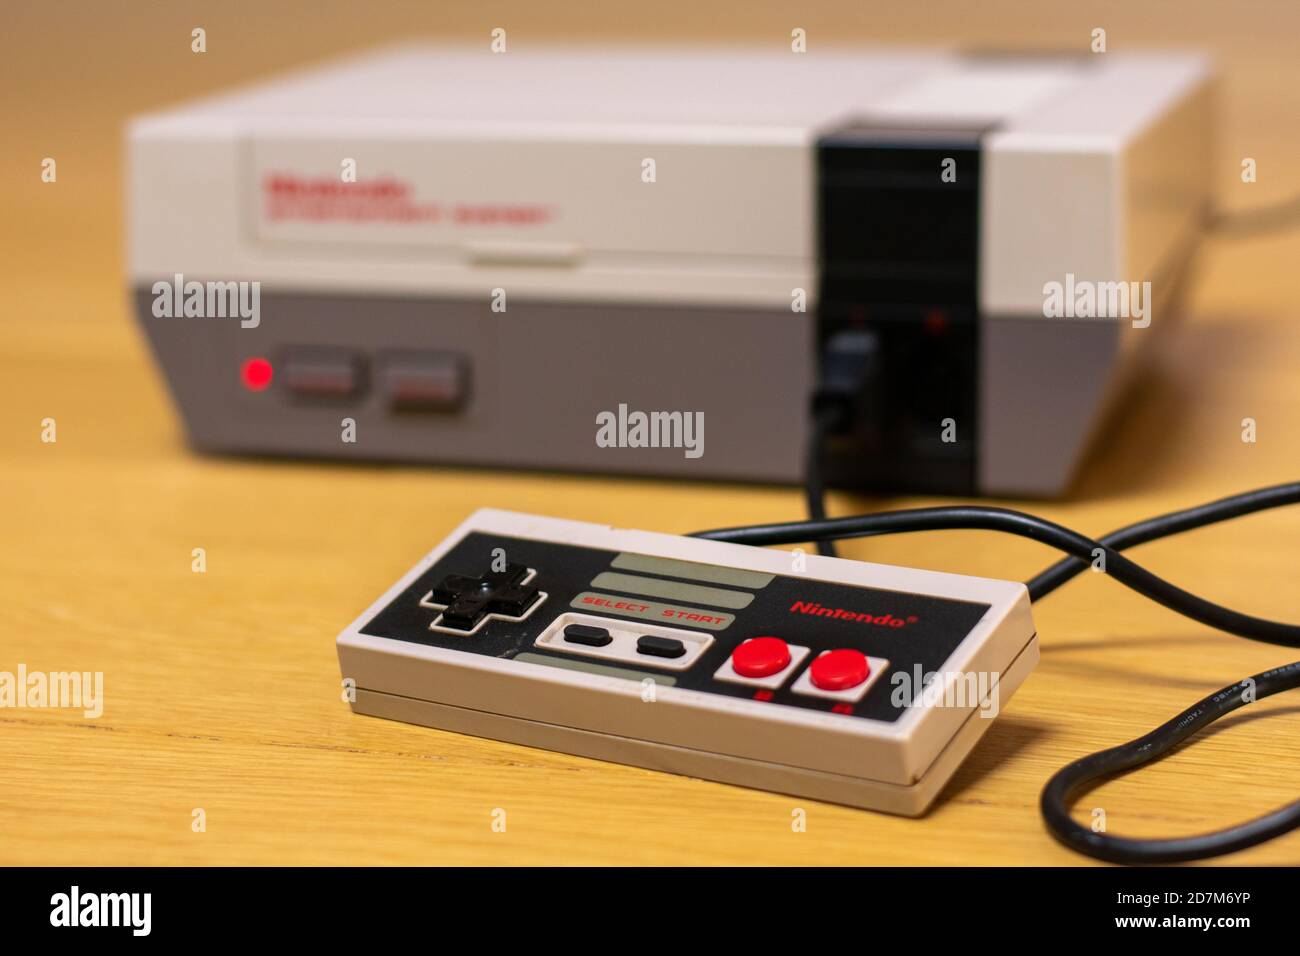 The Controller of a Nintendo Entertainment System on a wooden floor plugged into the console. Stock Photo